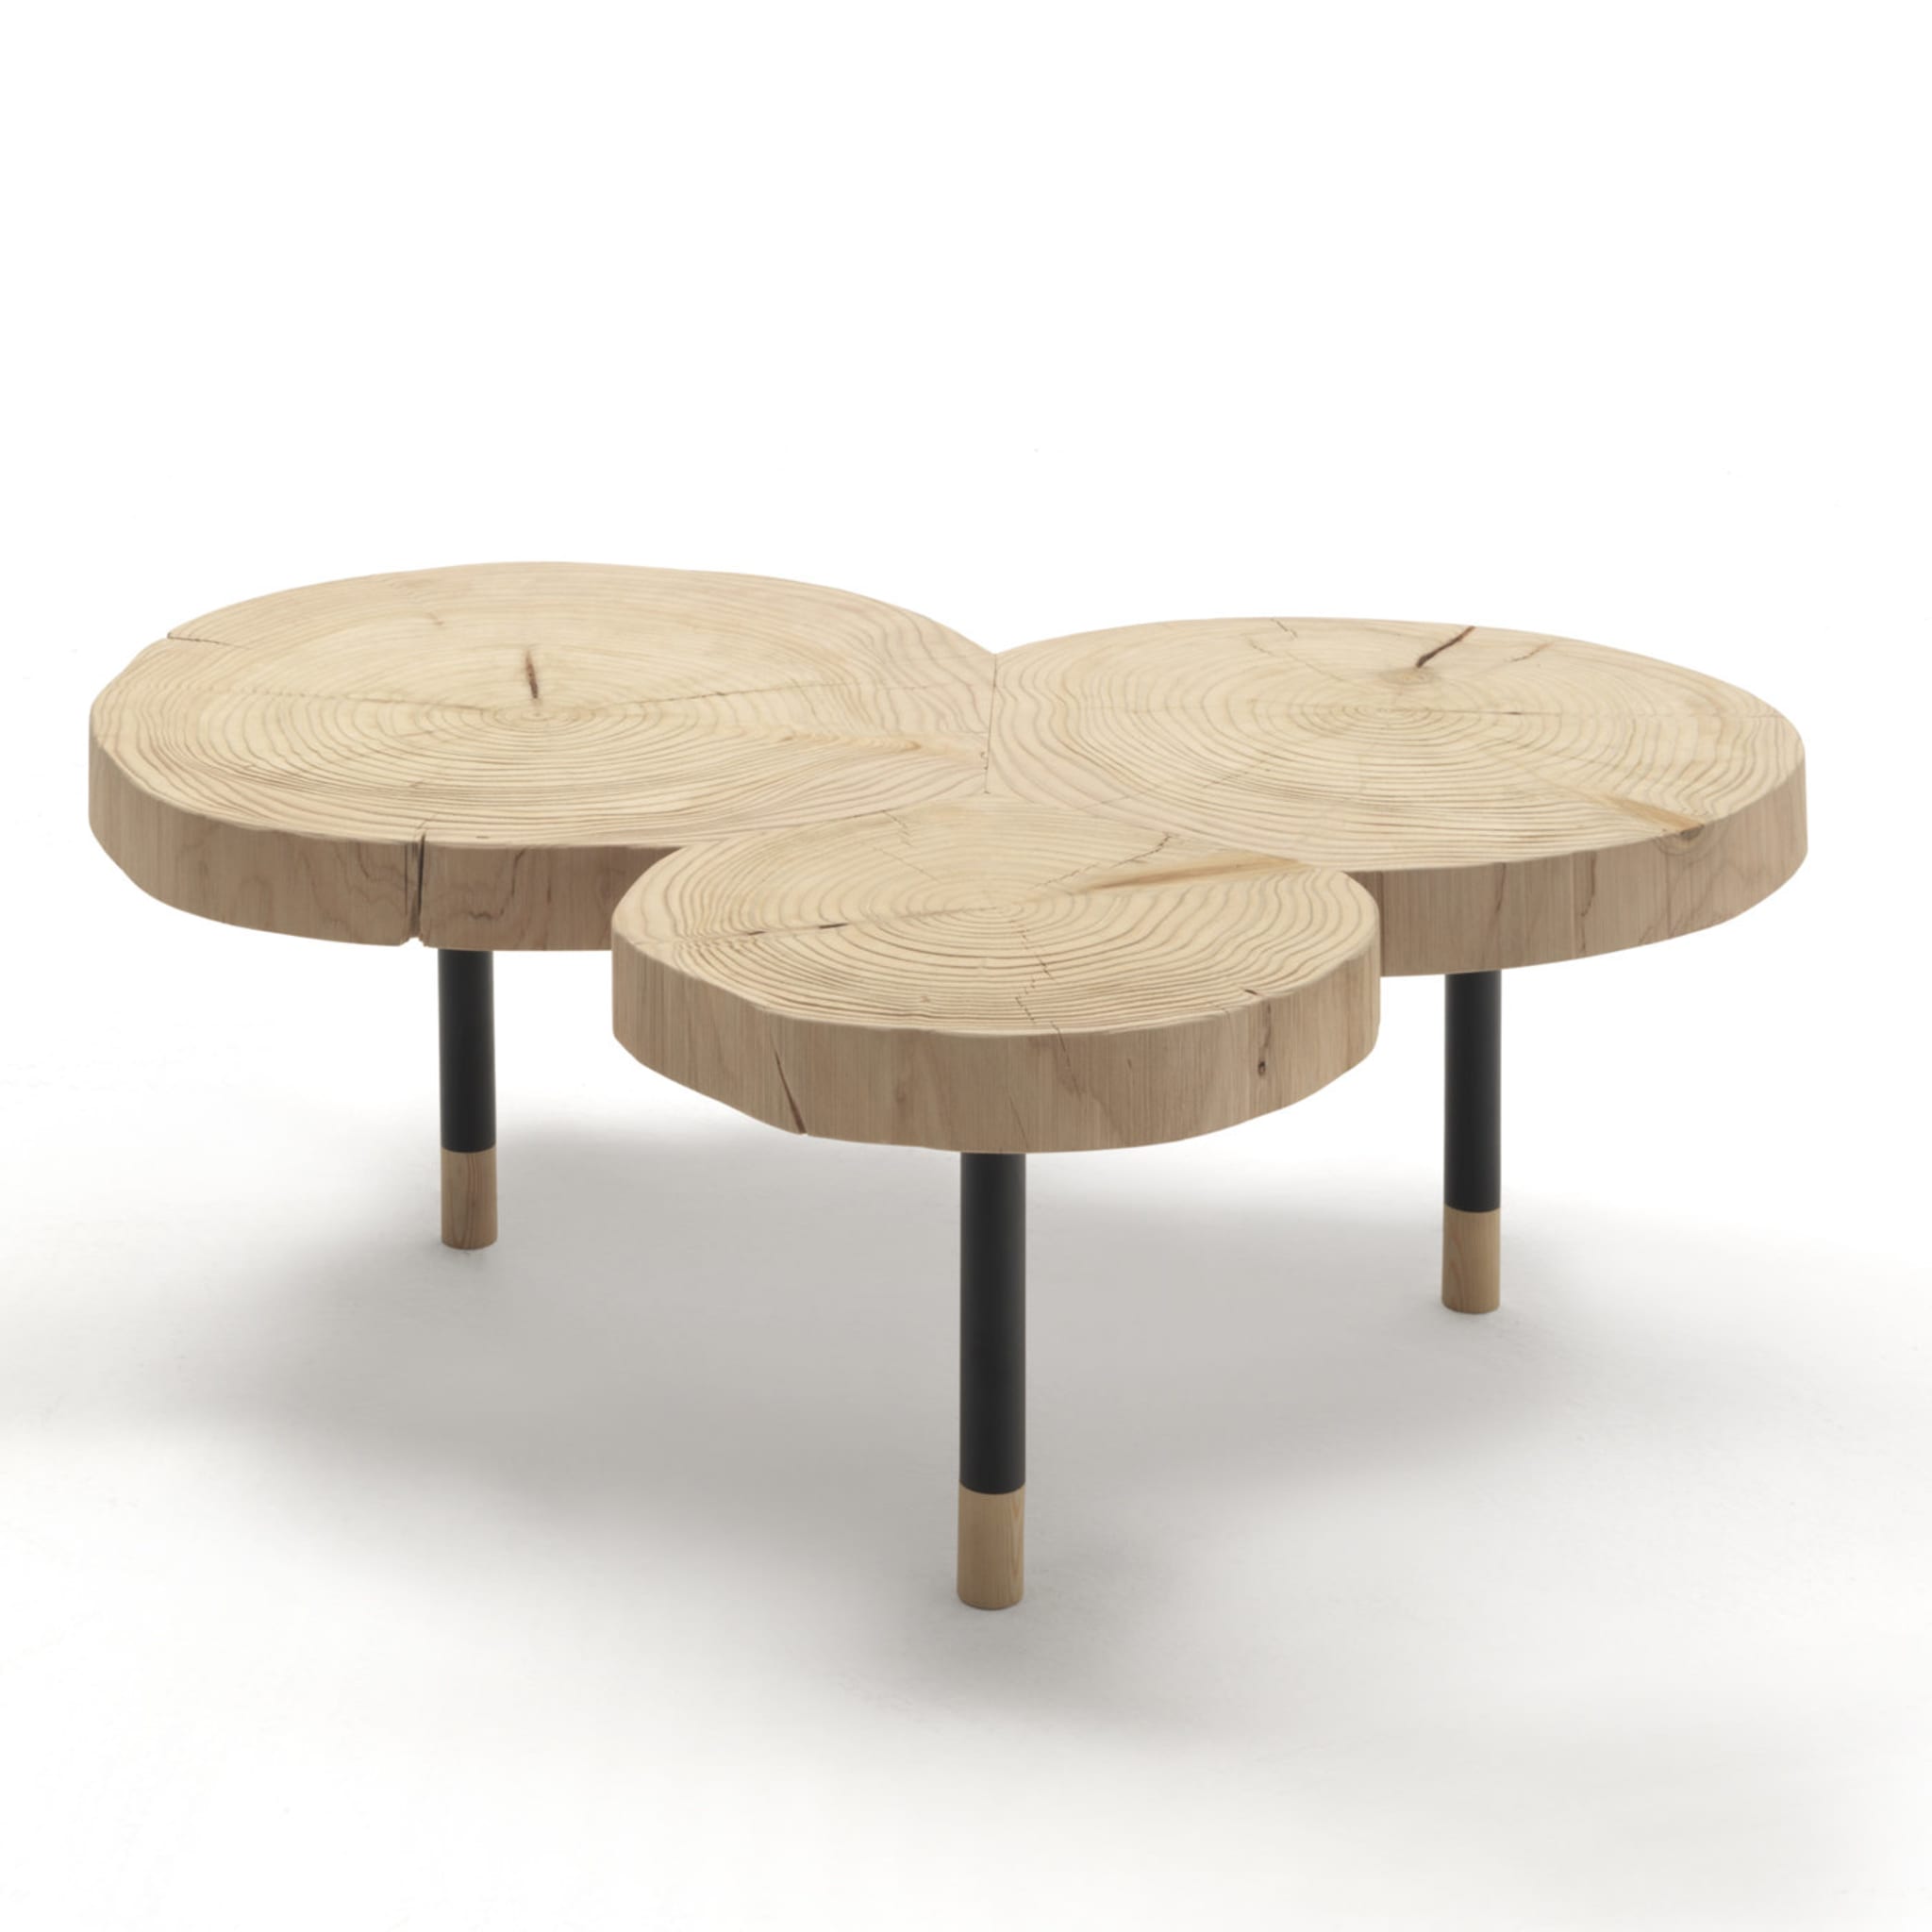 InsTable Coffee Table - Alternative view 1